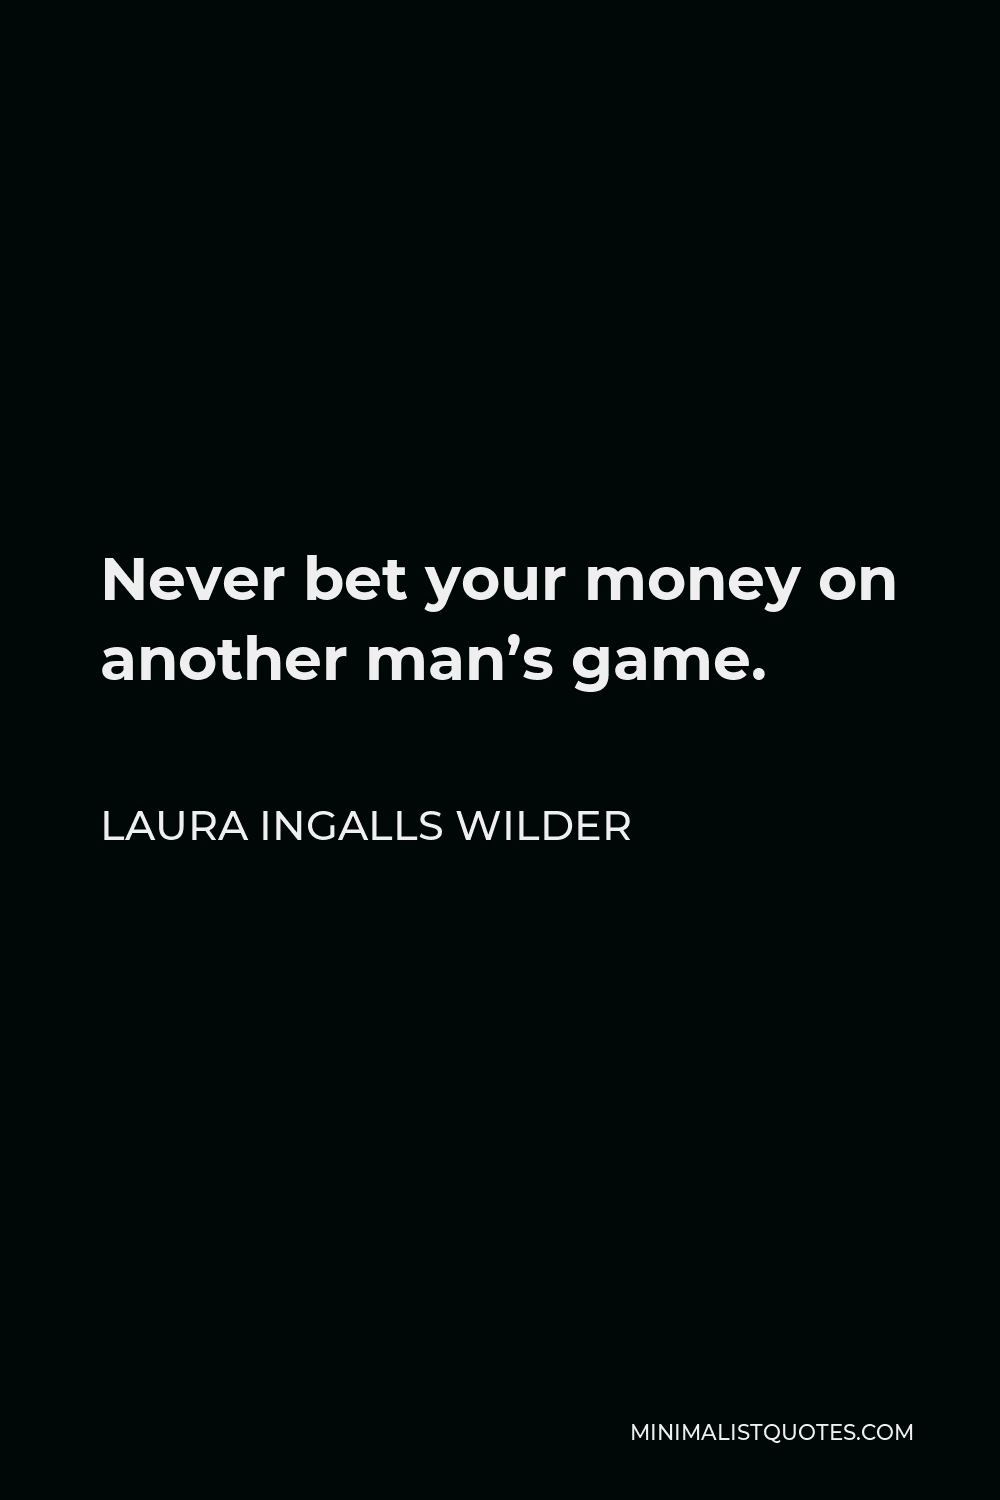 Laura Ingalls Wilder Quote - Never bet your money on another man’s game.